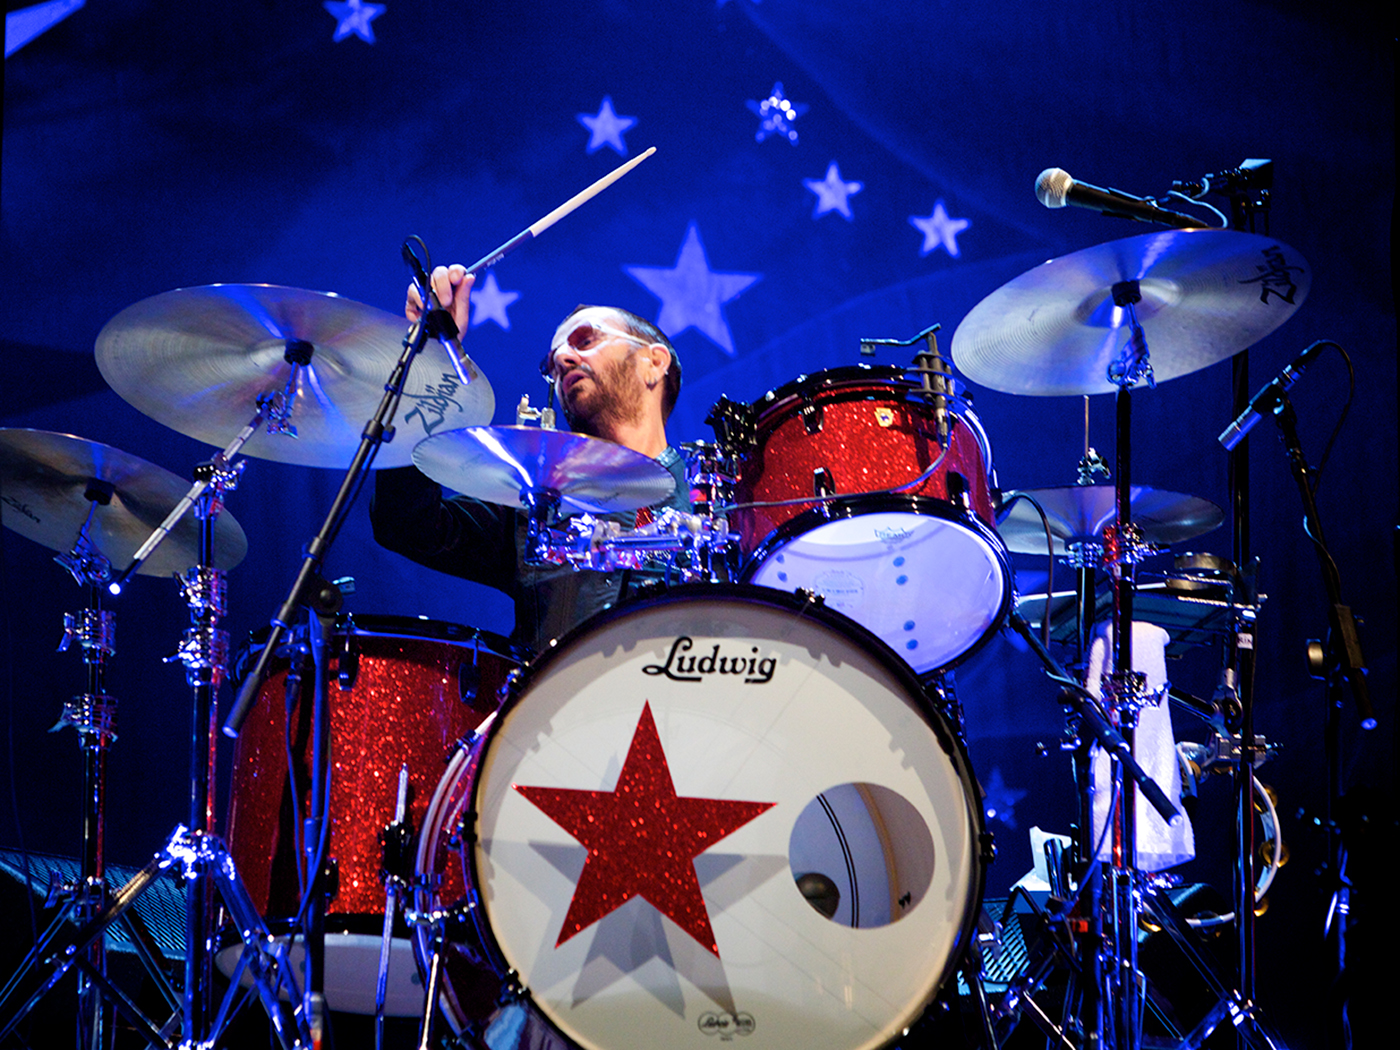 Ringo Starr performing, photo by Michael Hurcomb/Corbis via Getty Images